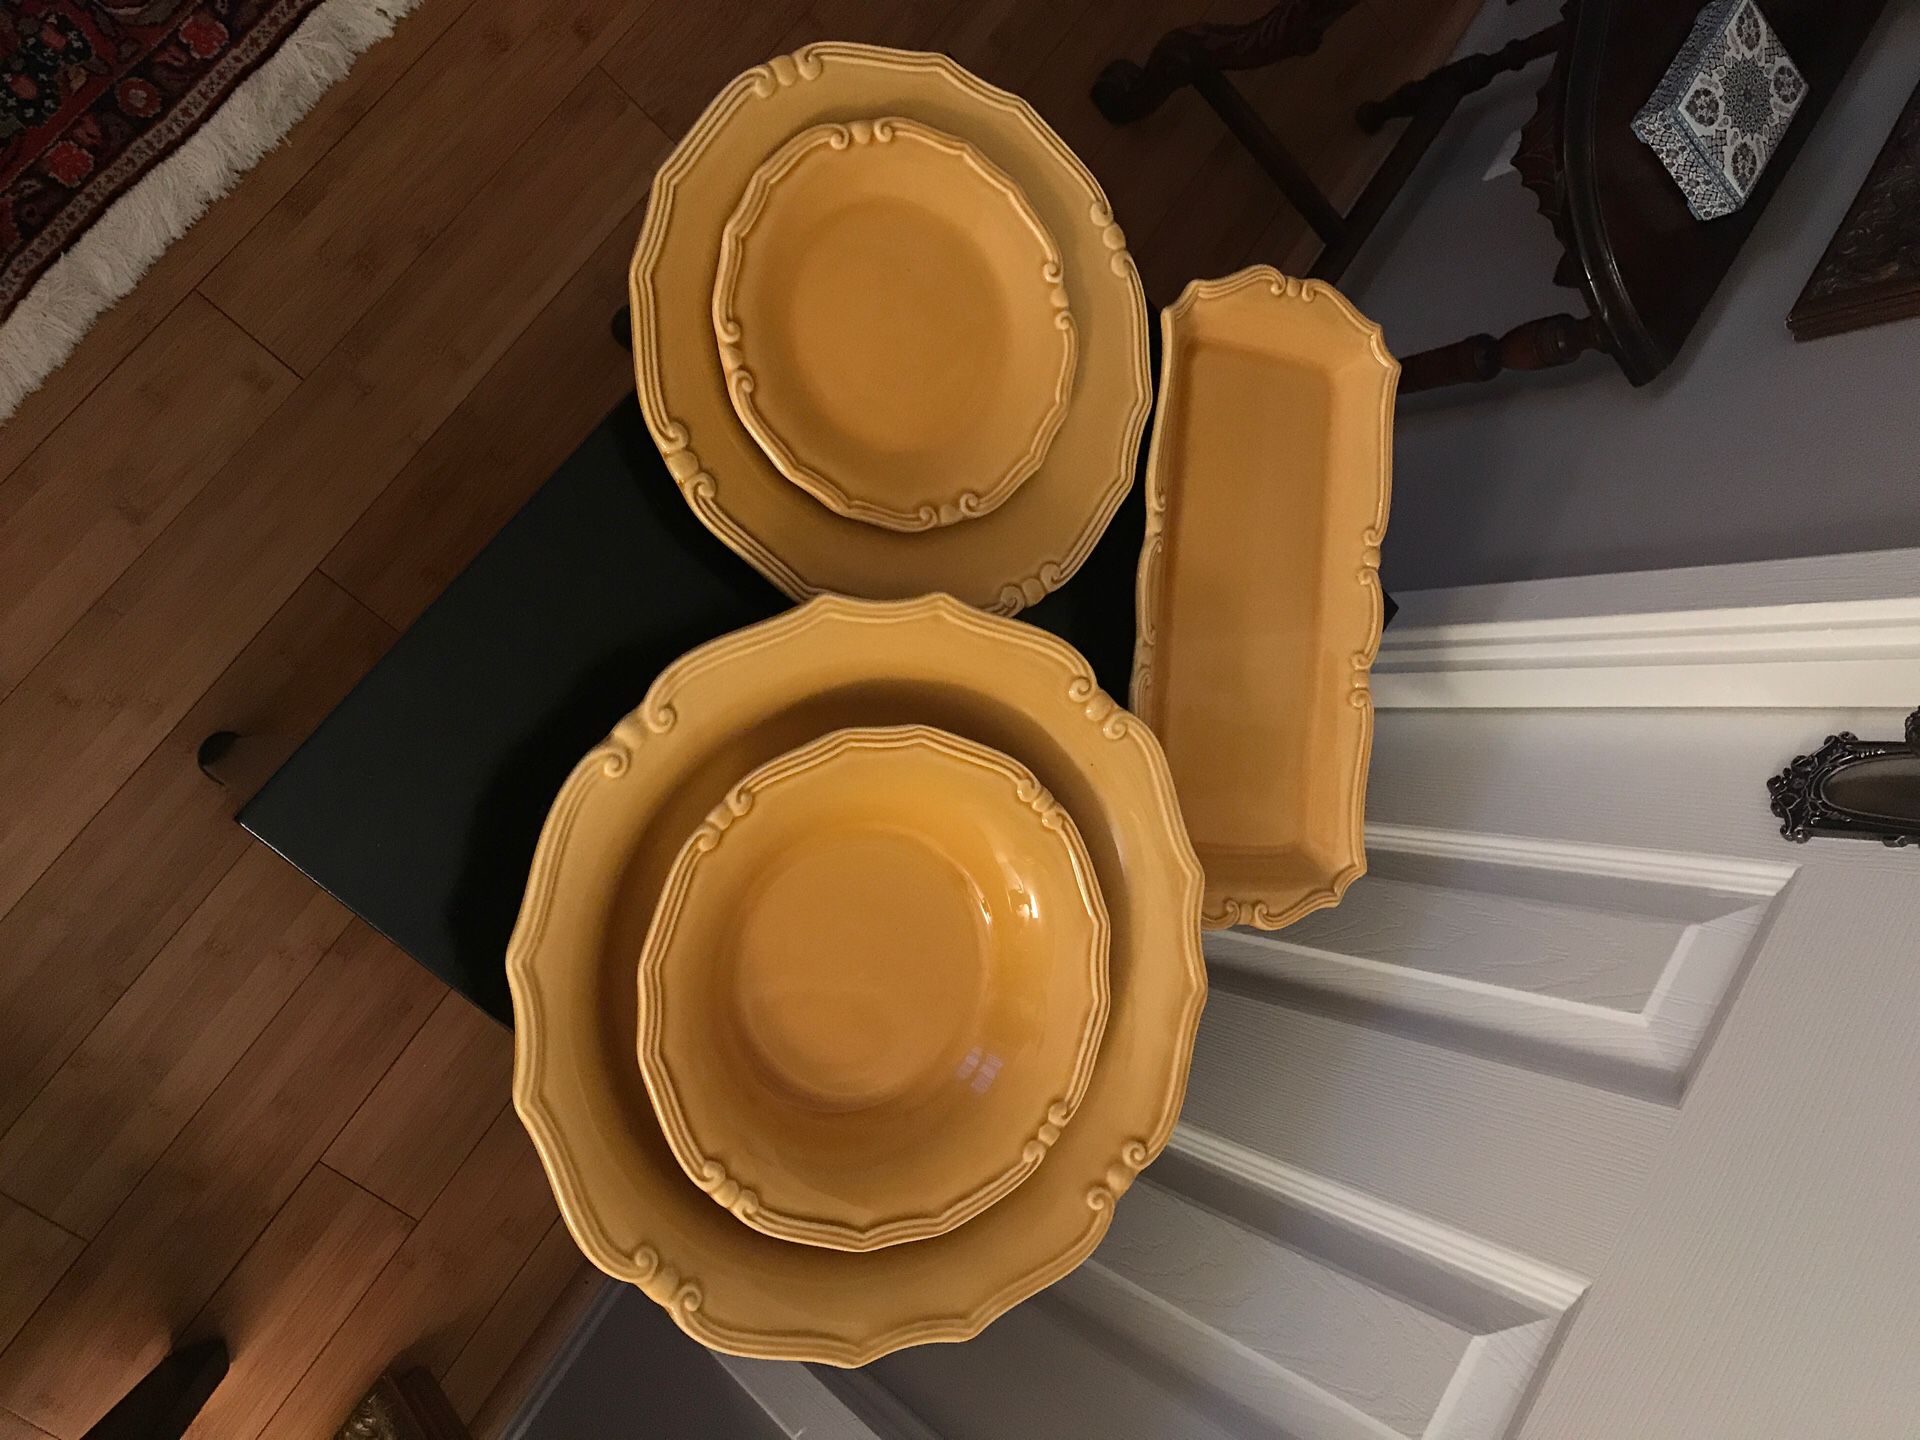 Williams &Sonoma set of dishes 4 each